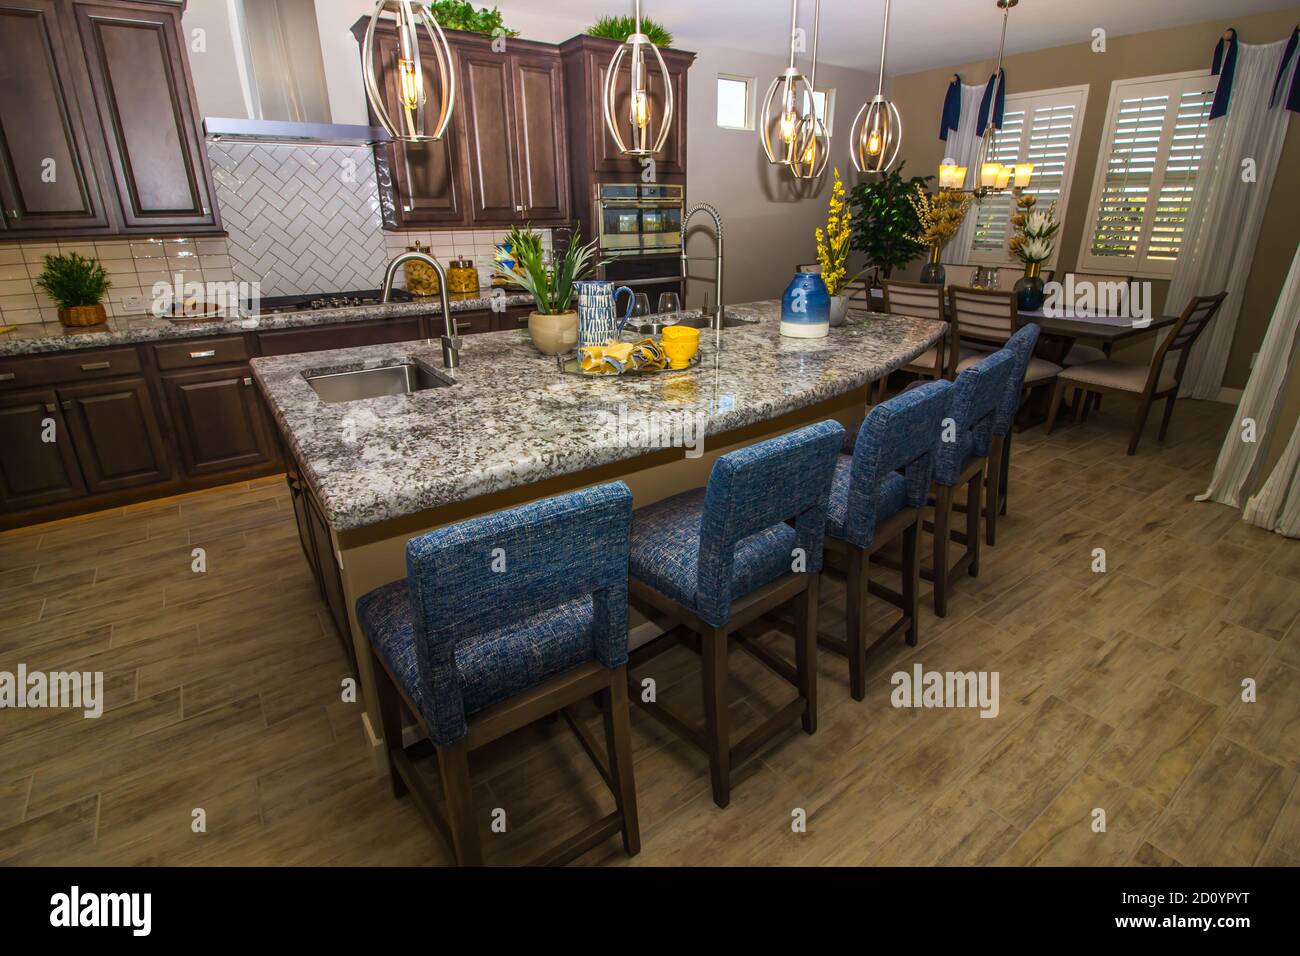 Granite Kitchen Island With Counter Bar Stools And Separate Dining Area Stock Photo